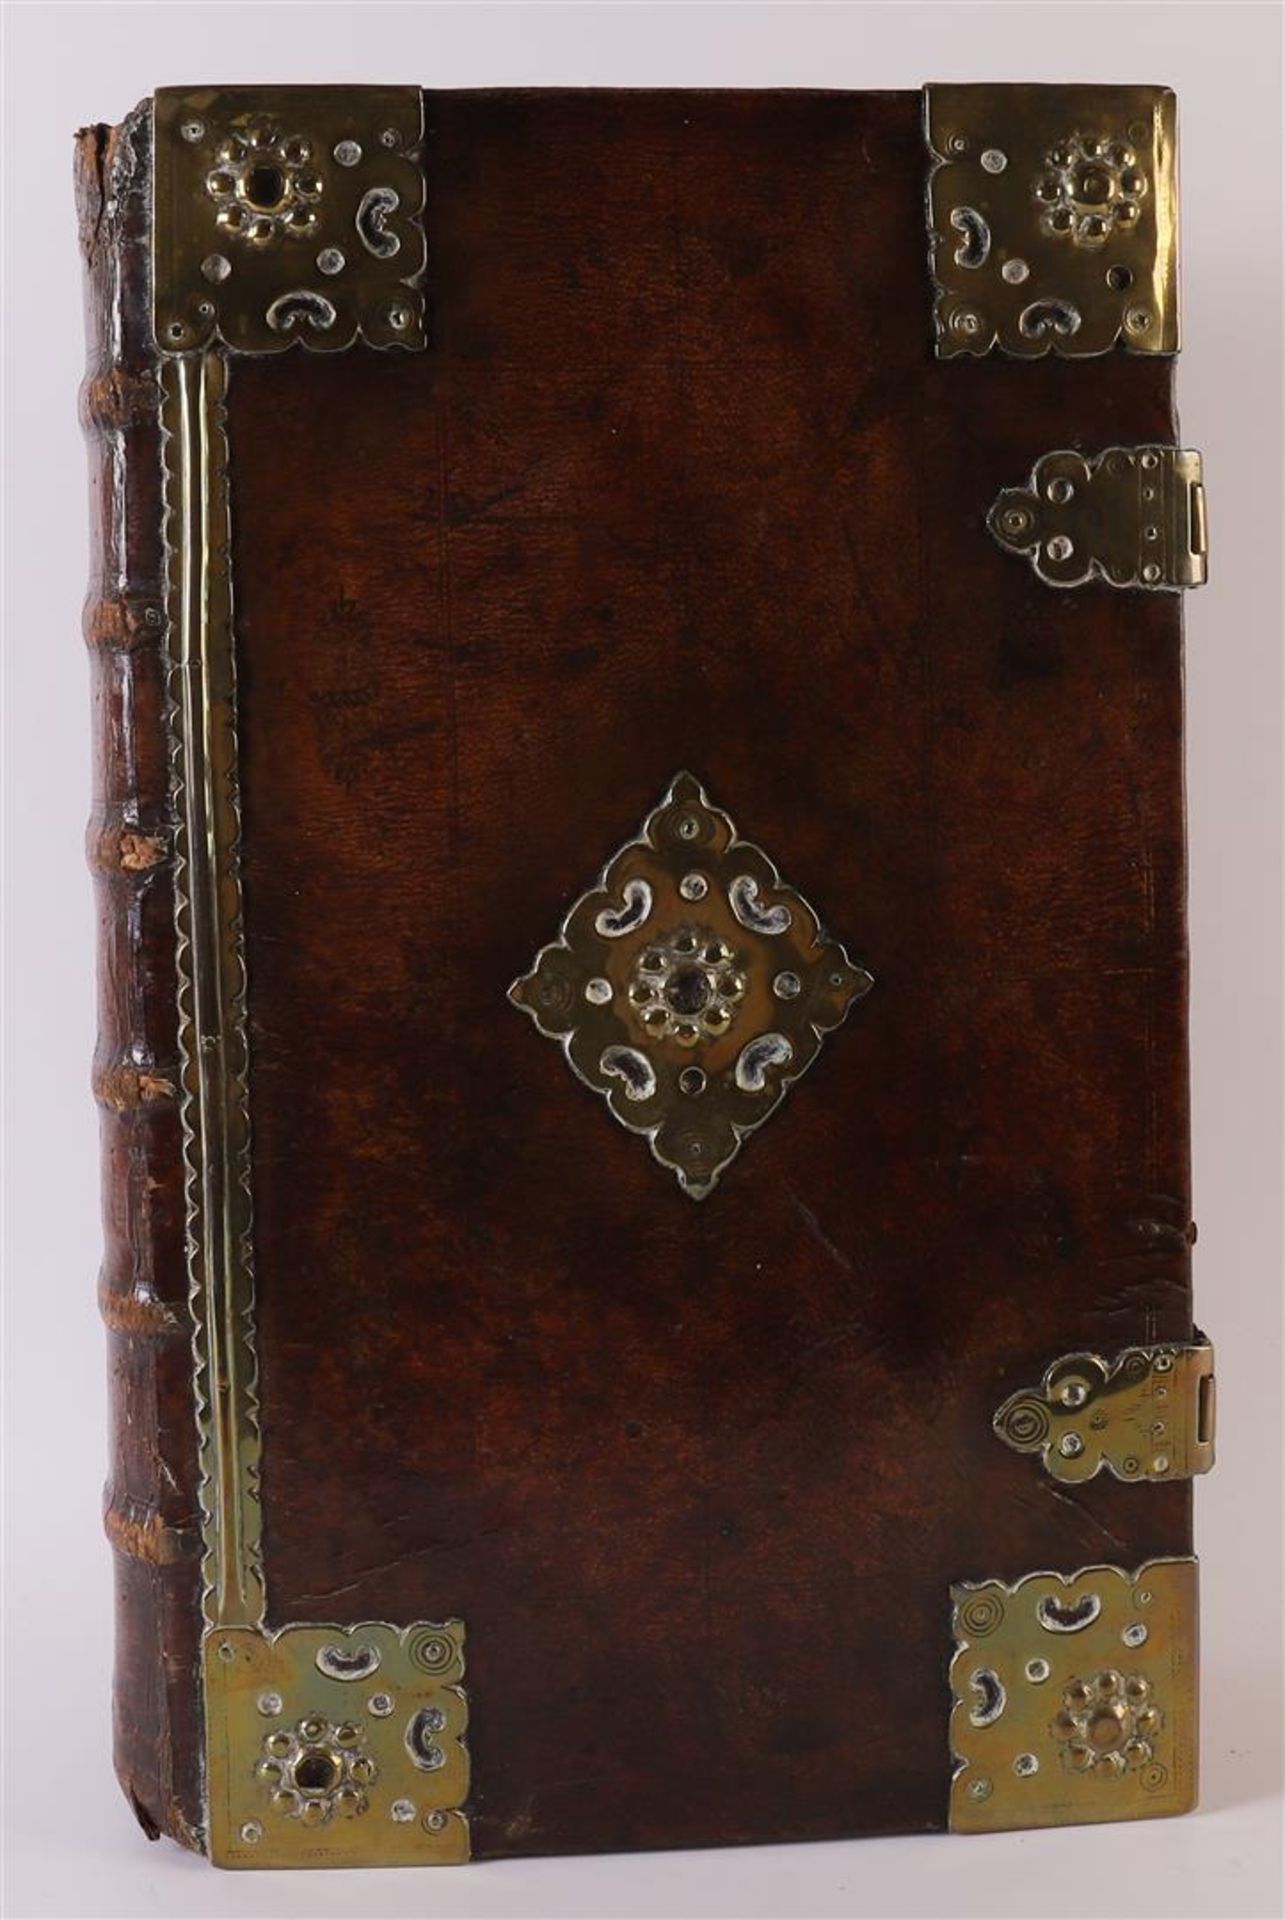 A State Bible in original brown leather binding with brass fittings and clasps, heirs Paulus Aertsz. - Image 2 of 12